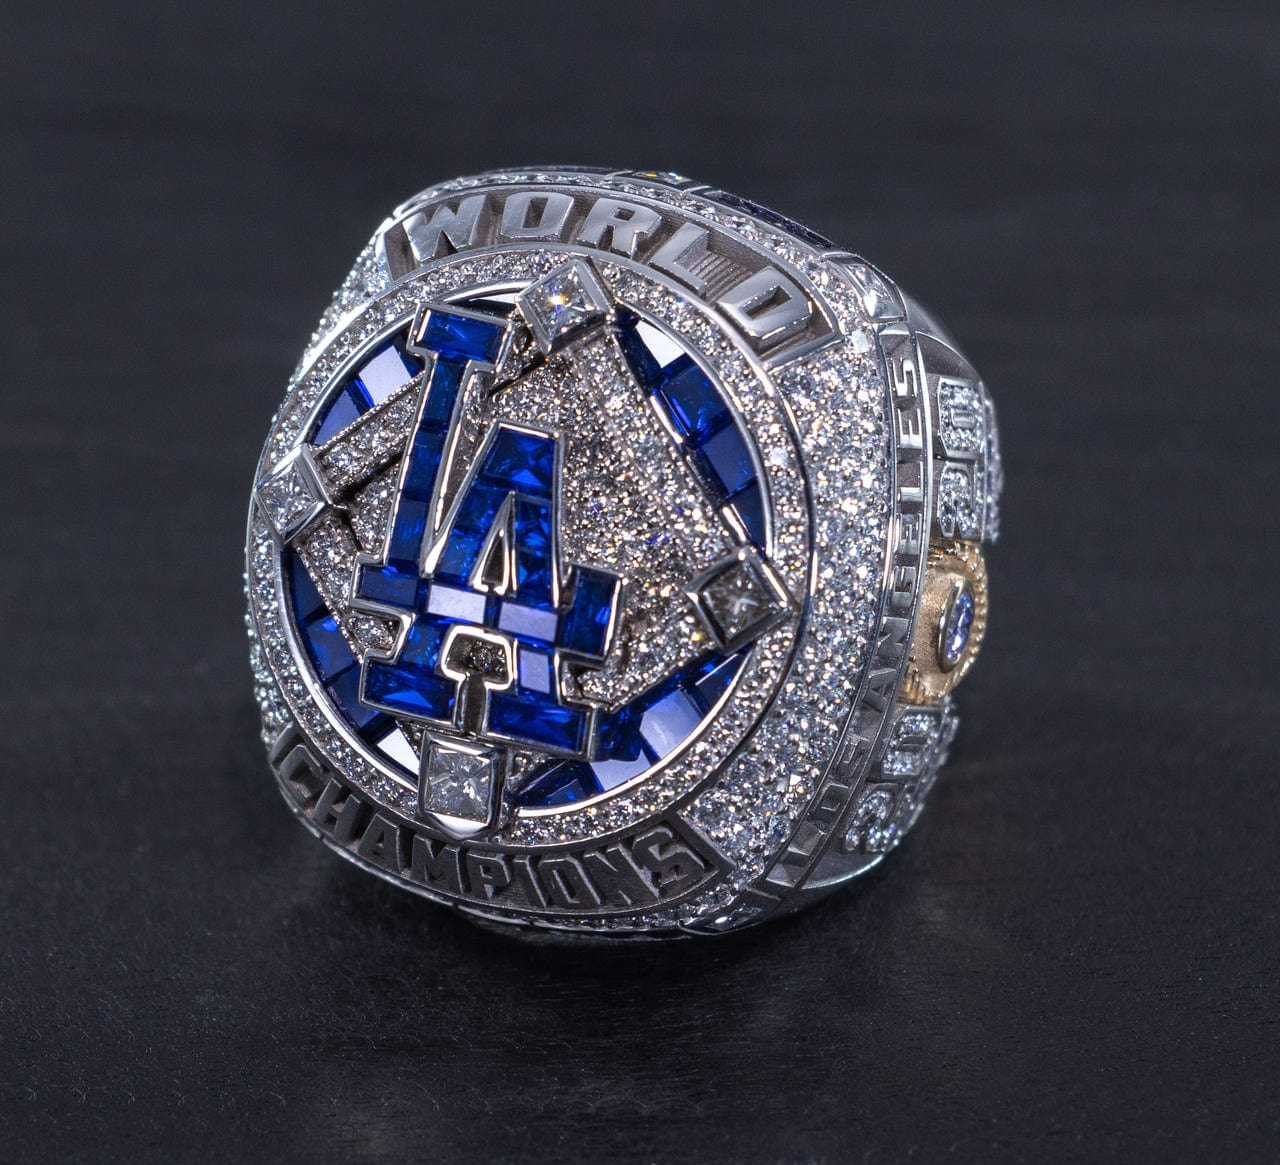 Latham Native Trying To Earn World Series Ring For Dodgers